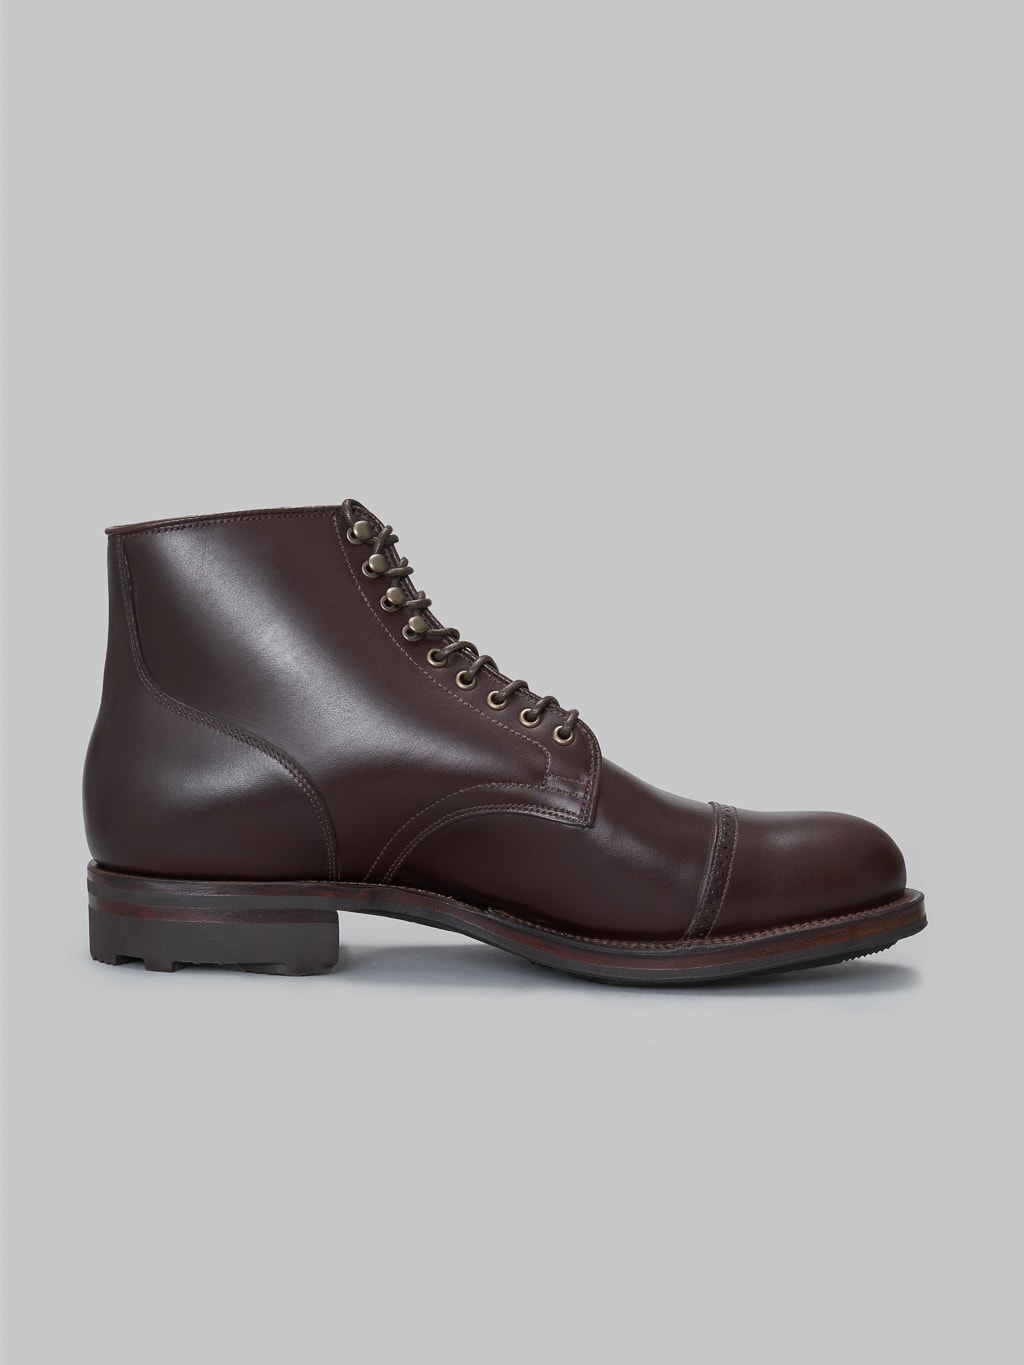 Viberg Service Boot 2030 Annonay Vocalau Warm Brown French Calf  side